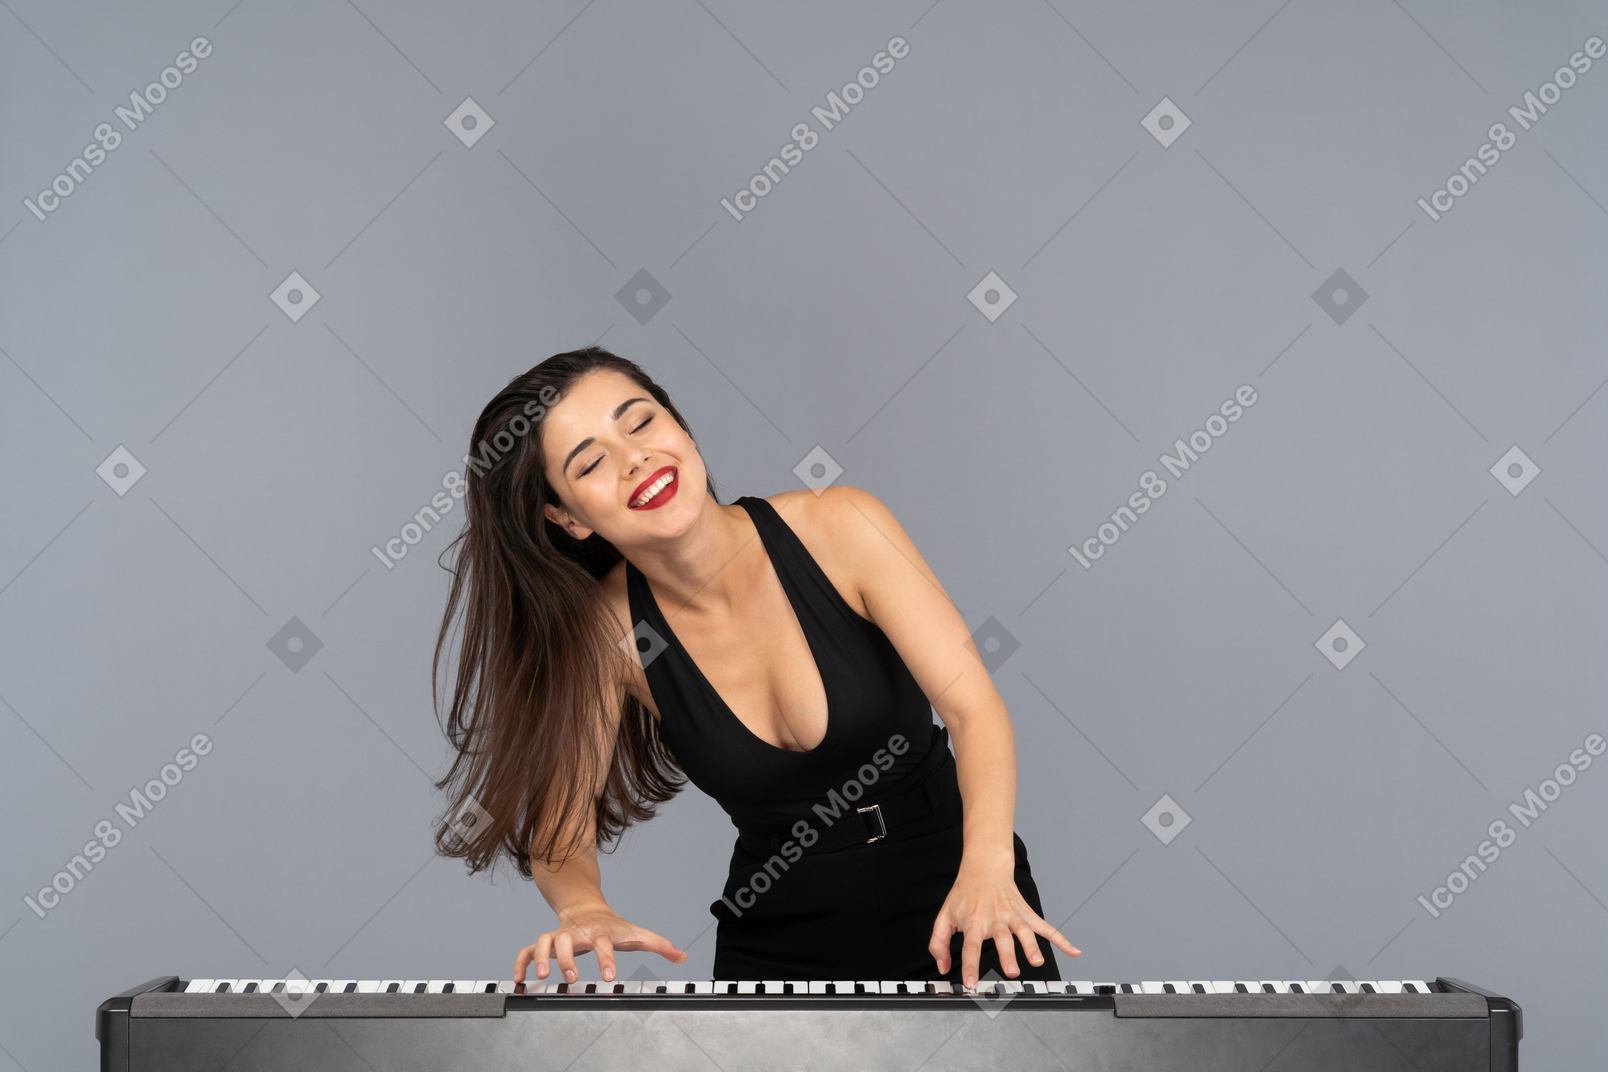 Beautiful smiling woman pounding out a tune